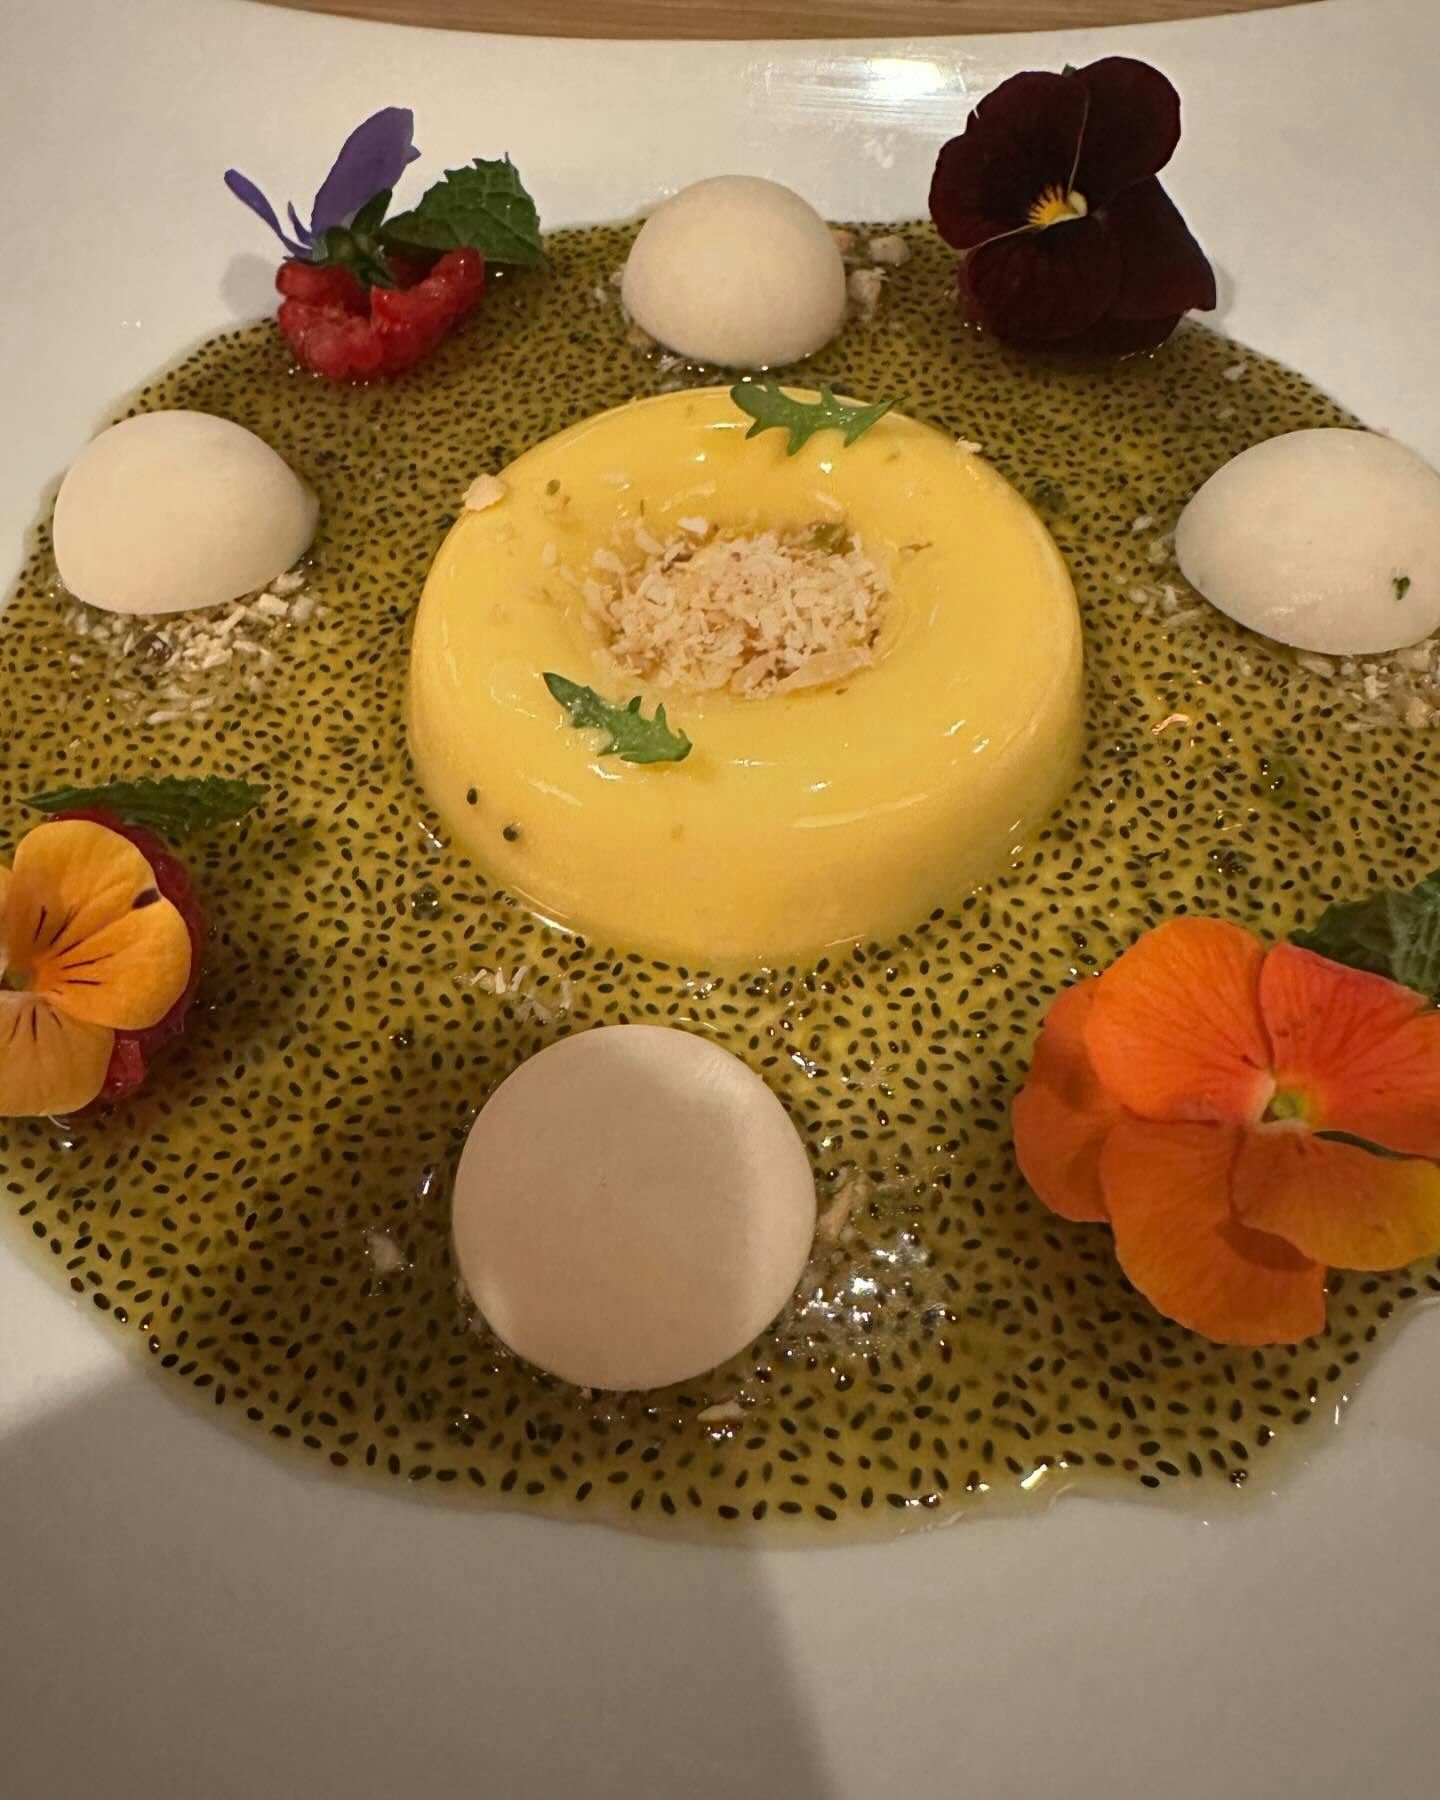 Artistic plating of a passionfruit gelato dessert encircled by edible flowers and a delicate seed garnish, capturing the essence of culinary artistry found in the fine dining experiences available through Booked in New York.